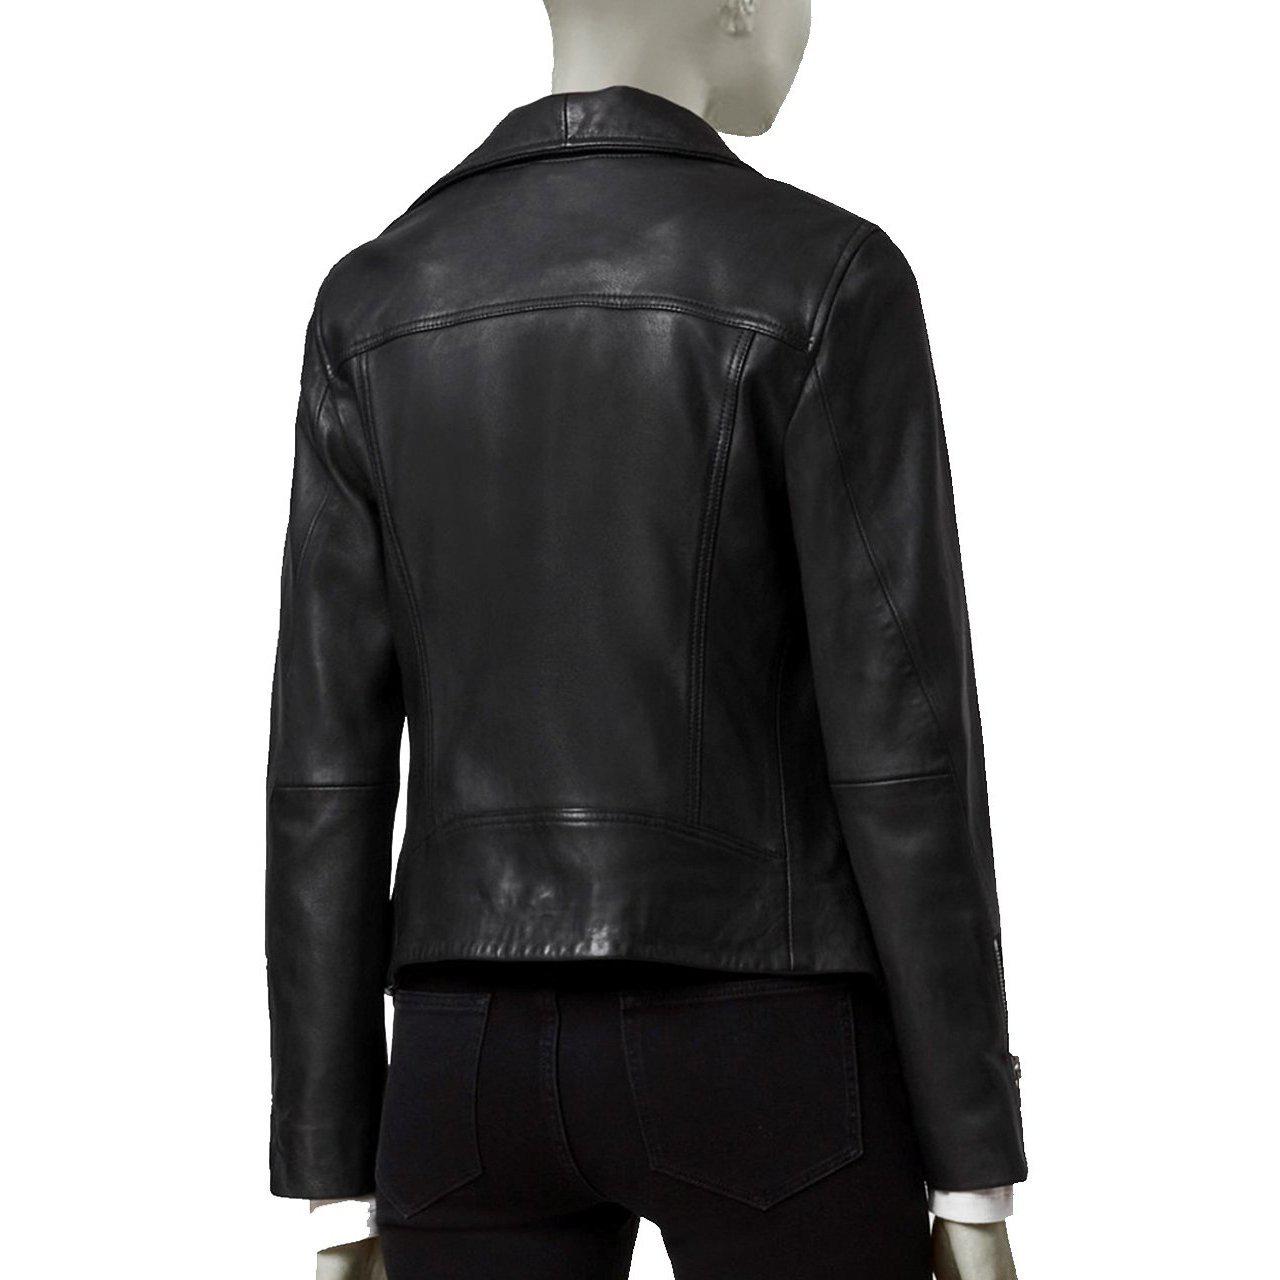 WOMEN LEATHER JACKET WITH LONG COLLAR AND ZIPPER SLEEVES - WOMEN LEATHER JACKET - Leather Jacket